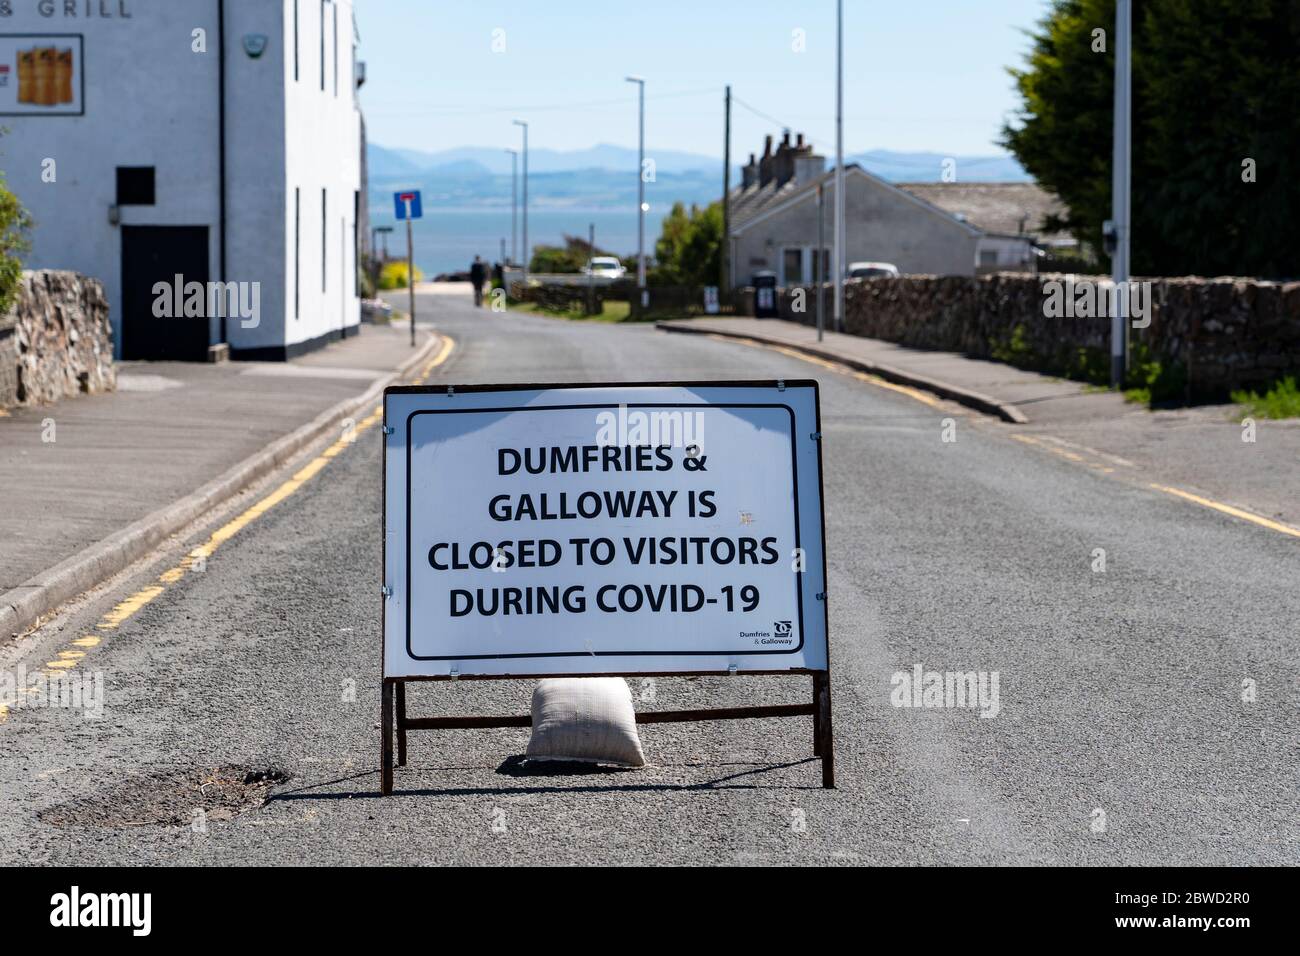 Southerness, Scotland, UK. 31 May 2020. Sign in road stating that Dumfries and Galloway region is closed to visitors during the cover-19 lockdown. All car parks and shops are closed in the popular tourist village. Scotland, UK. Iain Masterton/Alamy Live News Stock Photo